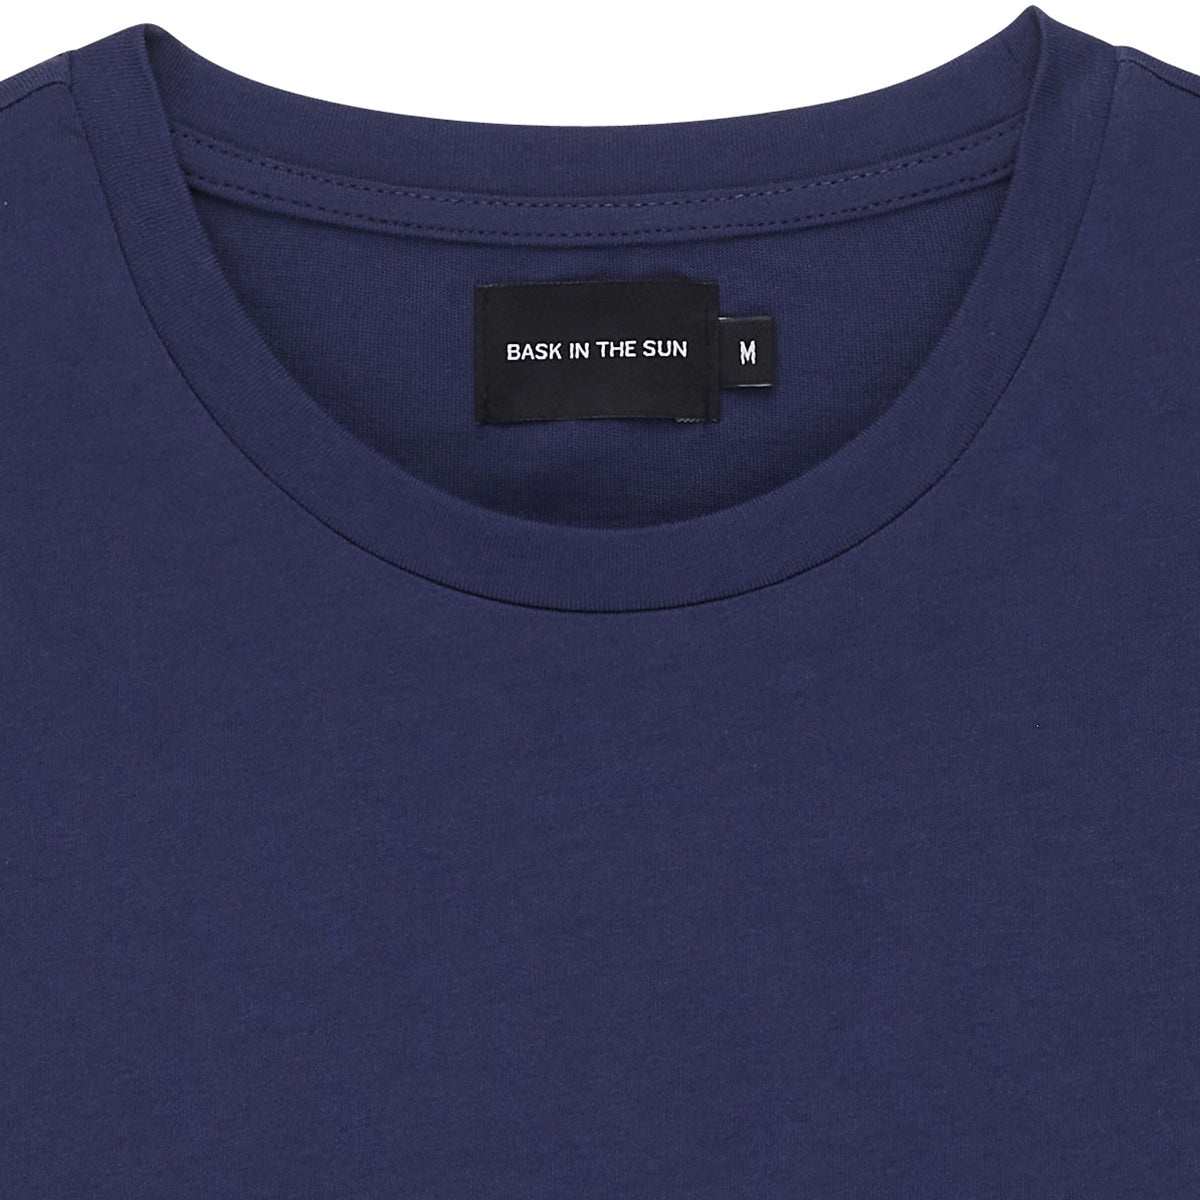 Mini to the sea t-shirt navy - Bask in the sun